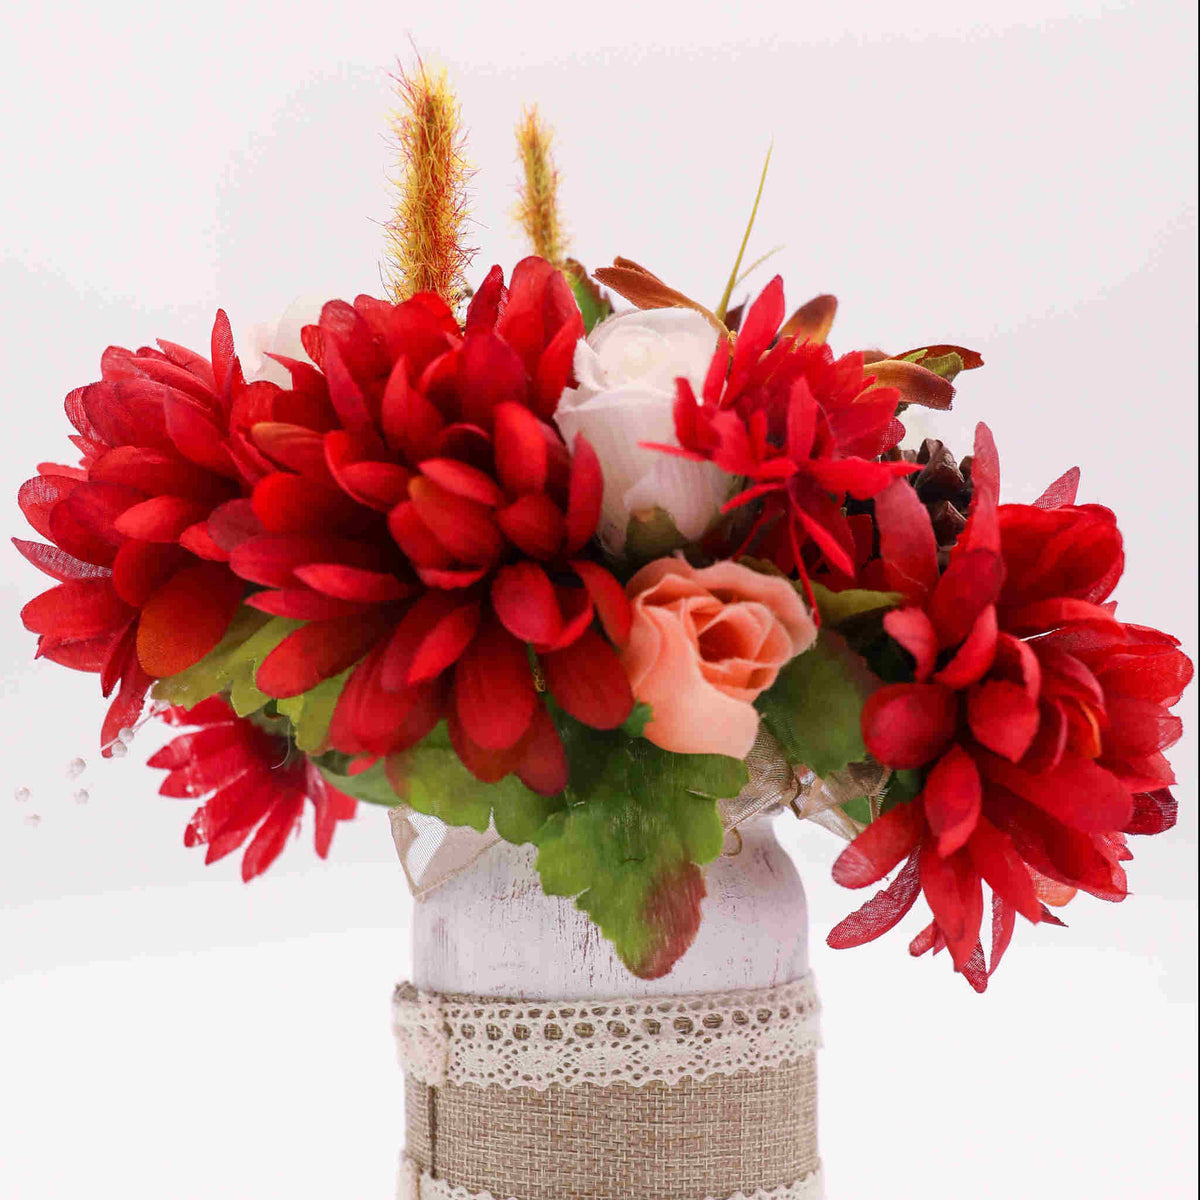 Add the feeling of Autumn to your celebration with our Autumn Mason Jar Centerpiece. This rustic mason jar centerpiece is the perfect compliment to an Autumn wedding. Adorned with burlap and lace, the mason jar holds seasonal silk flowers.